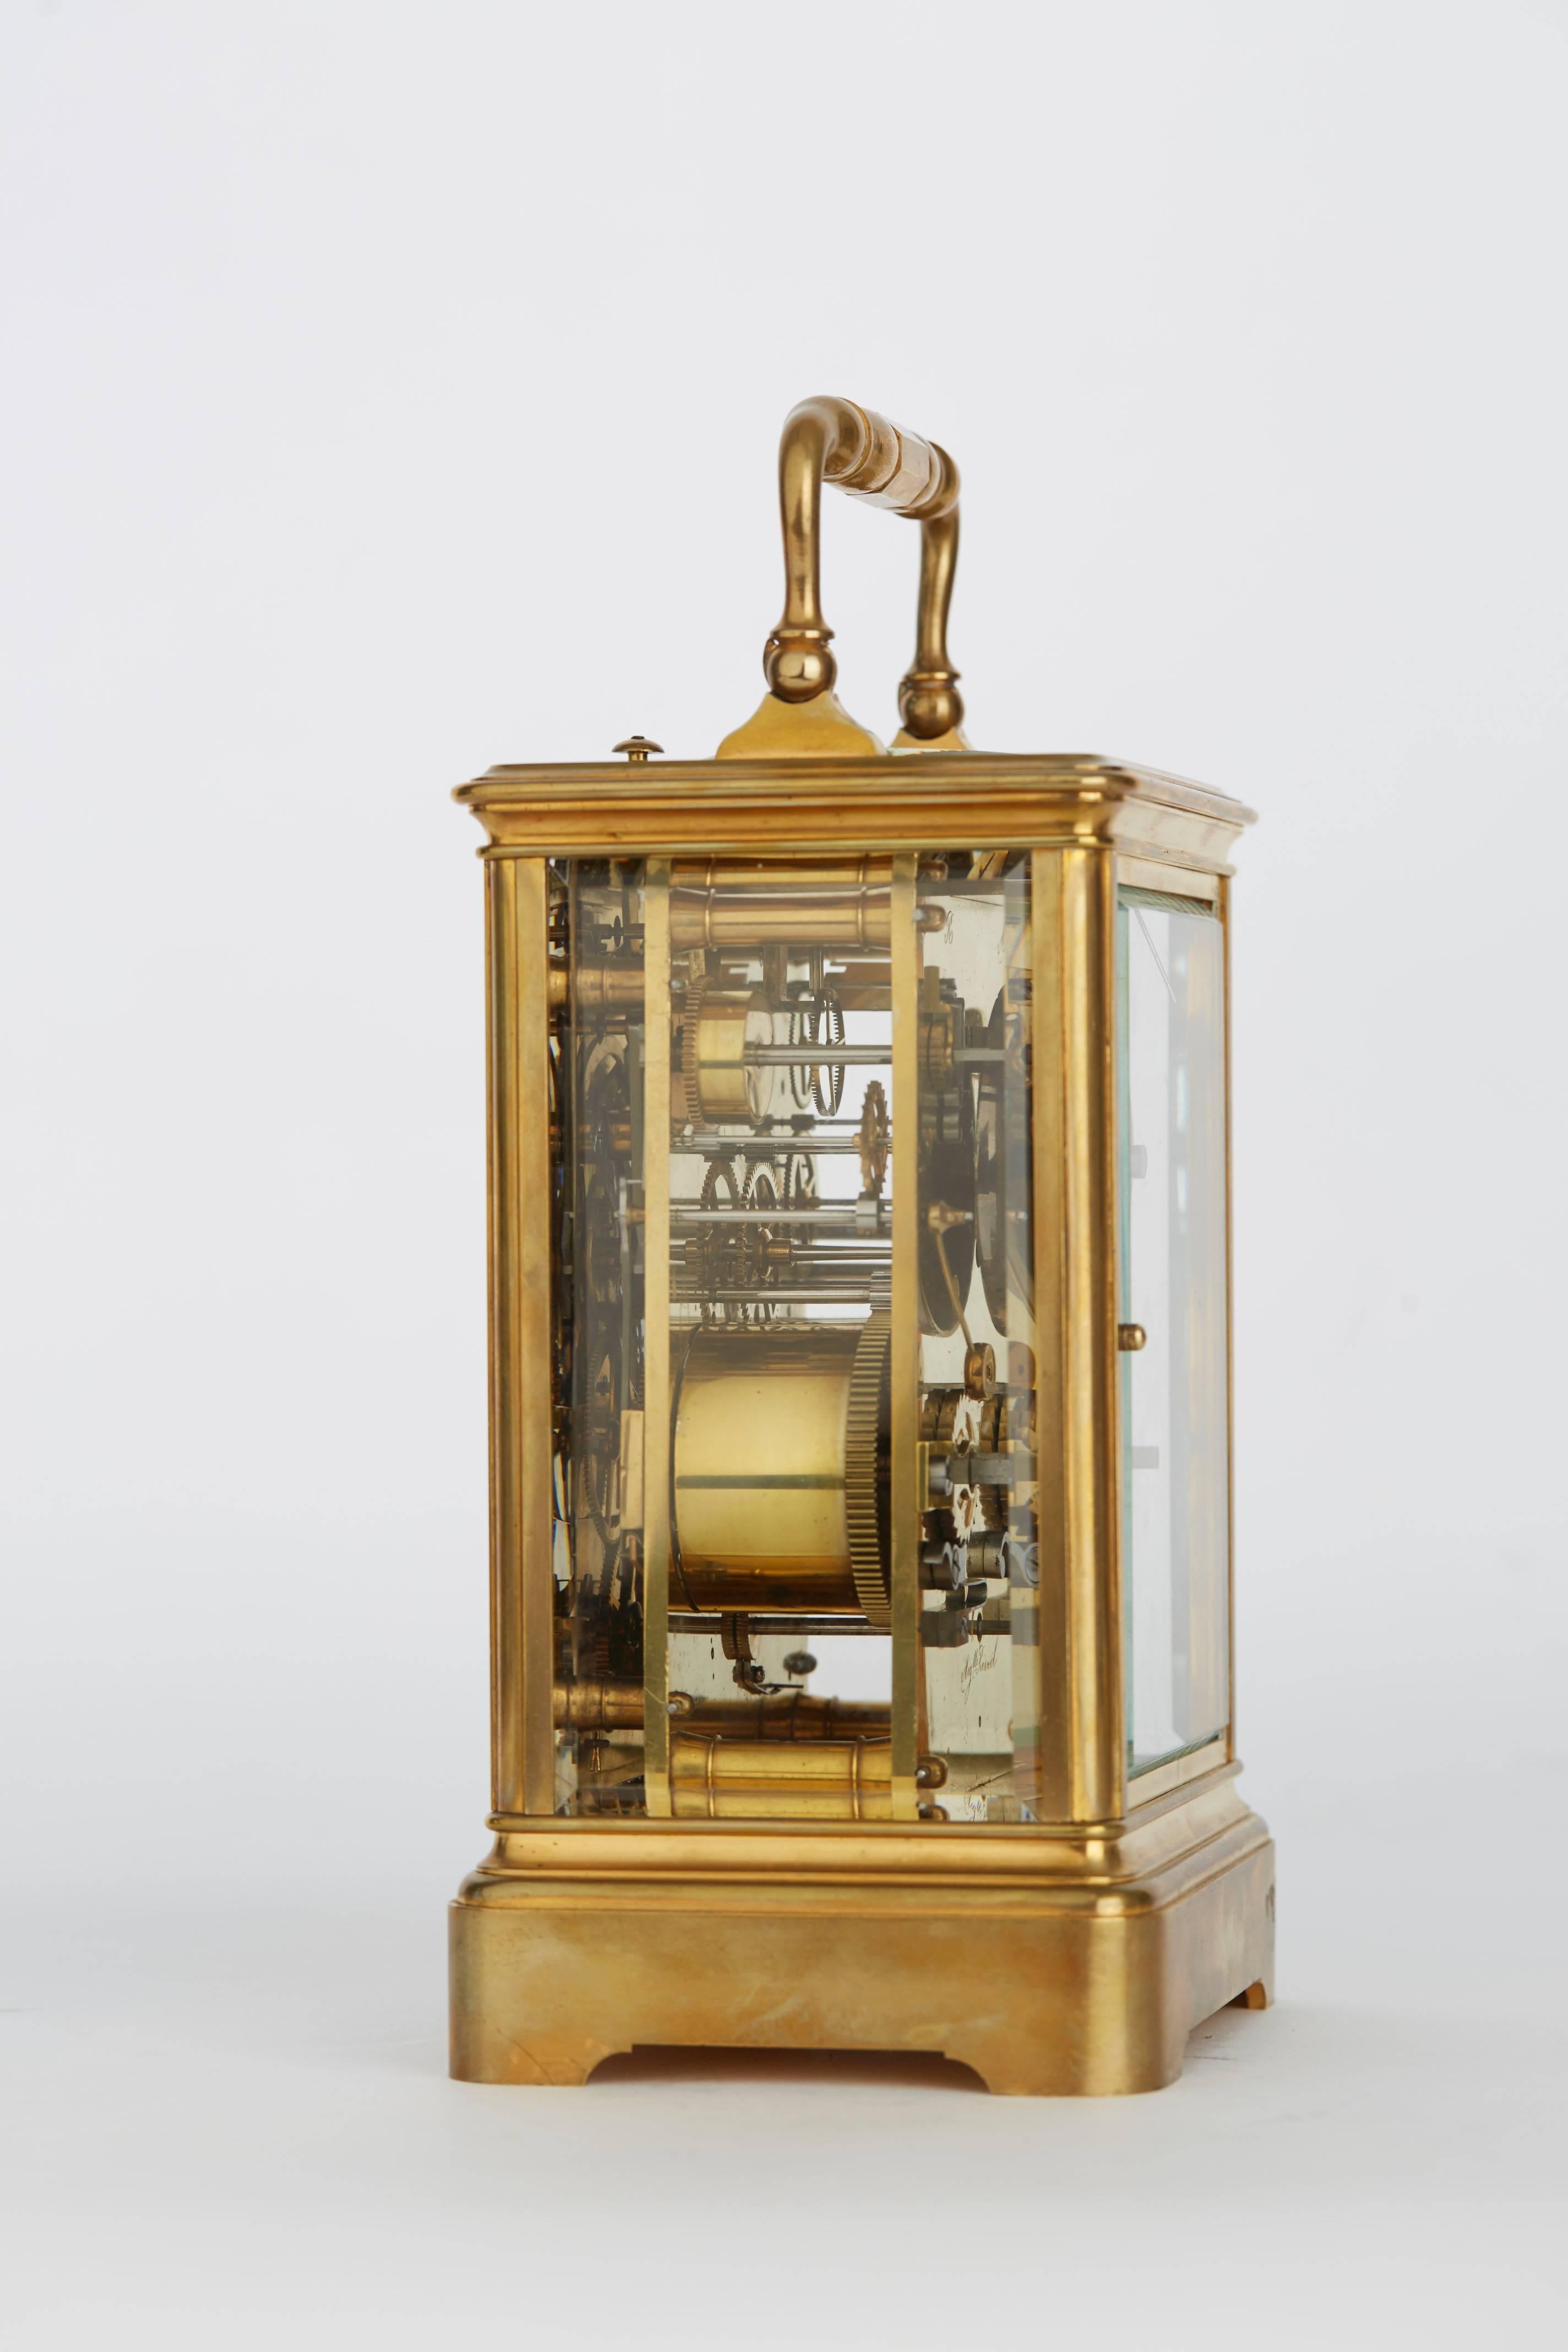 Thomas, 8 Rue Abbatucci, Paris circa 1880. A giant carriage clock with hour strike, repeat and alarm number 211 together with a leather covered traveling box. 
Case: brass, gilt, moulded, facet gazed on all sides and the top, baluster shaped handle